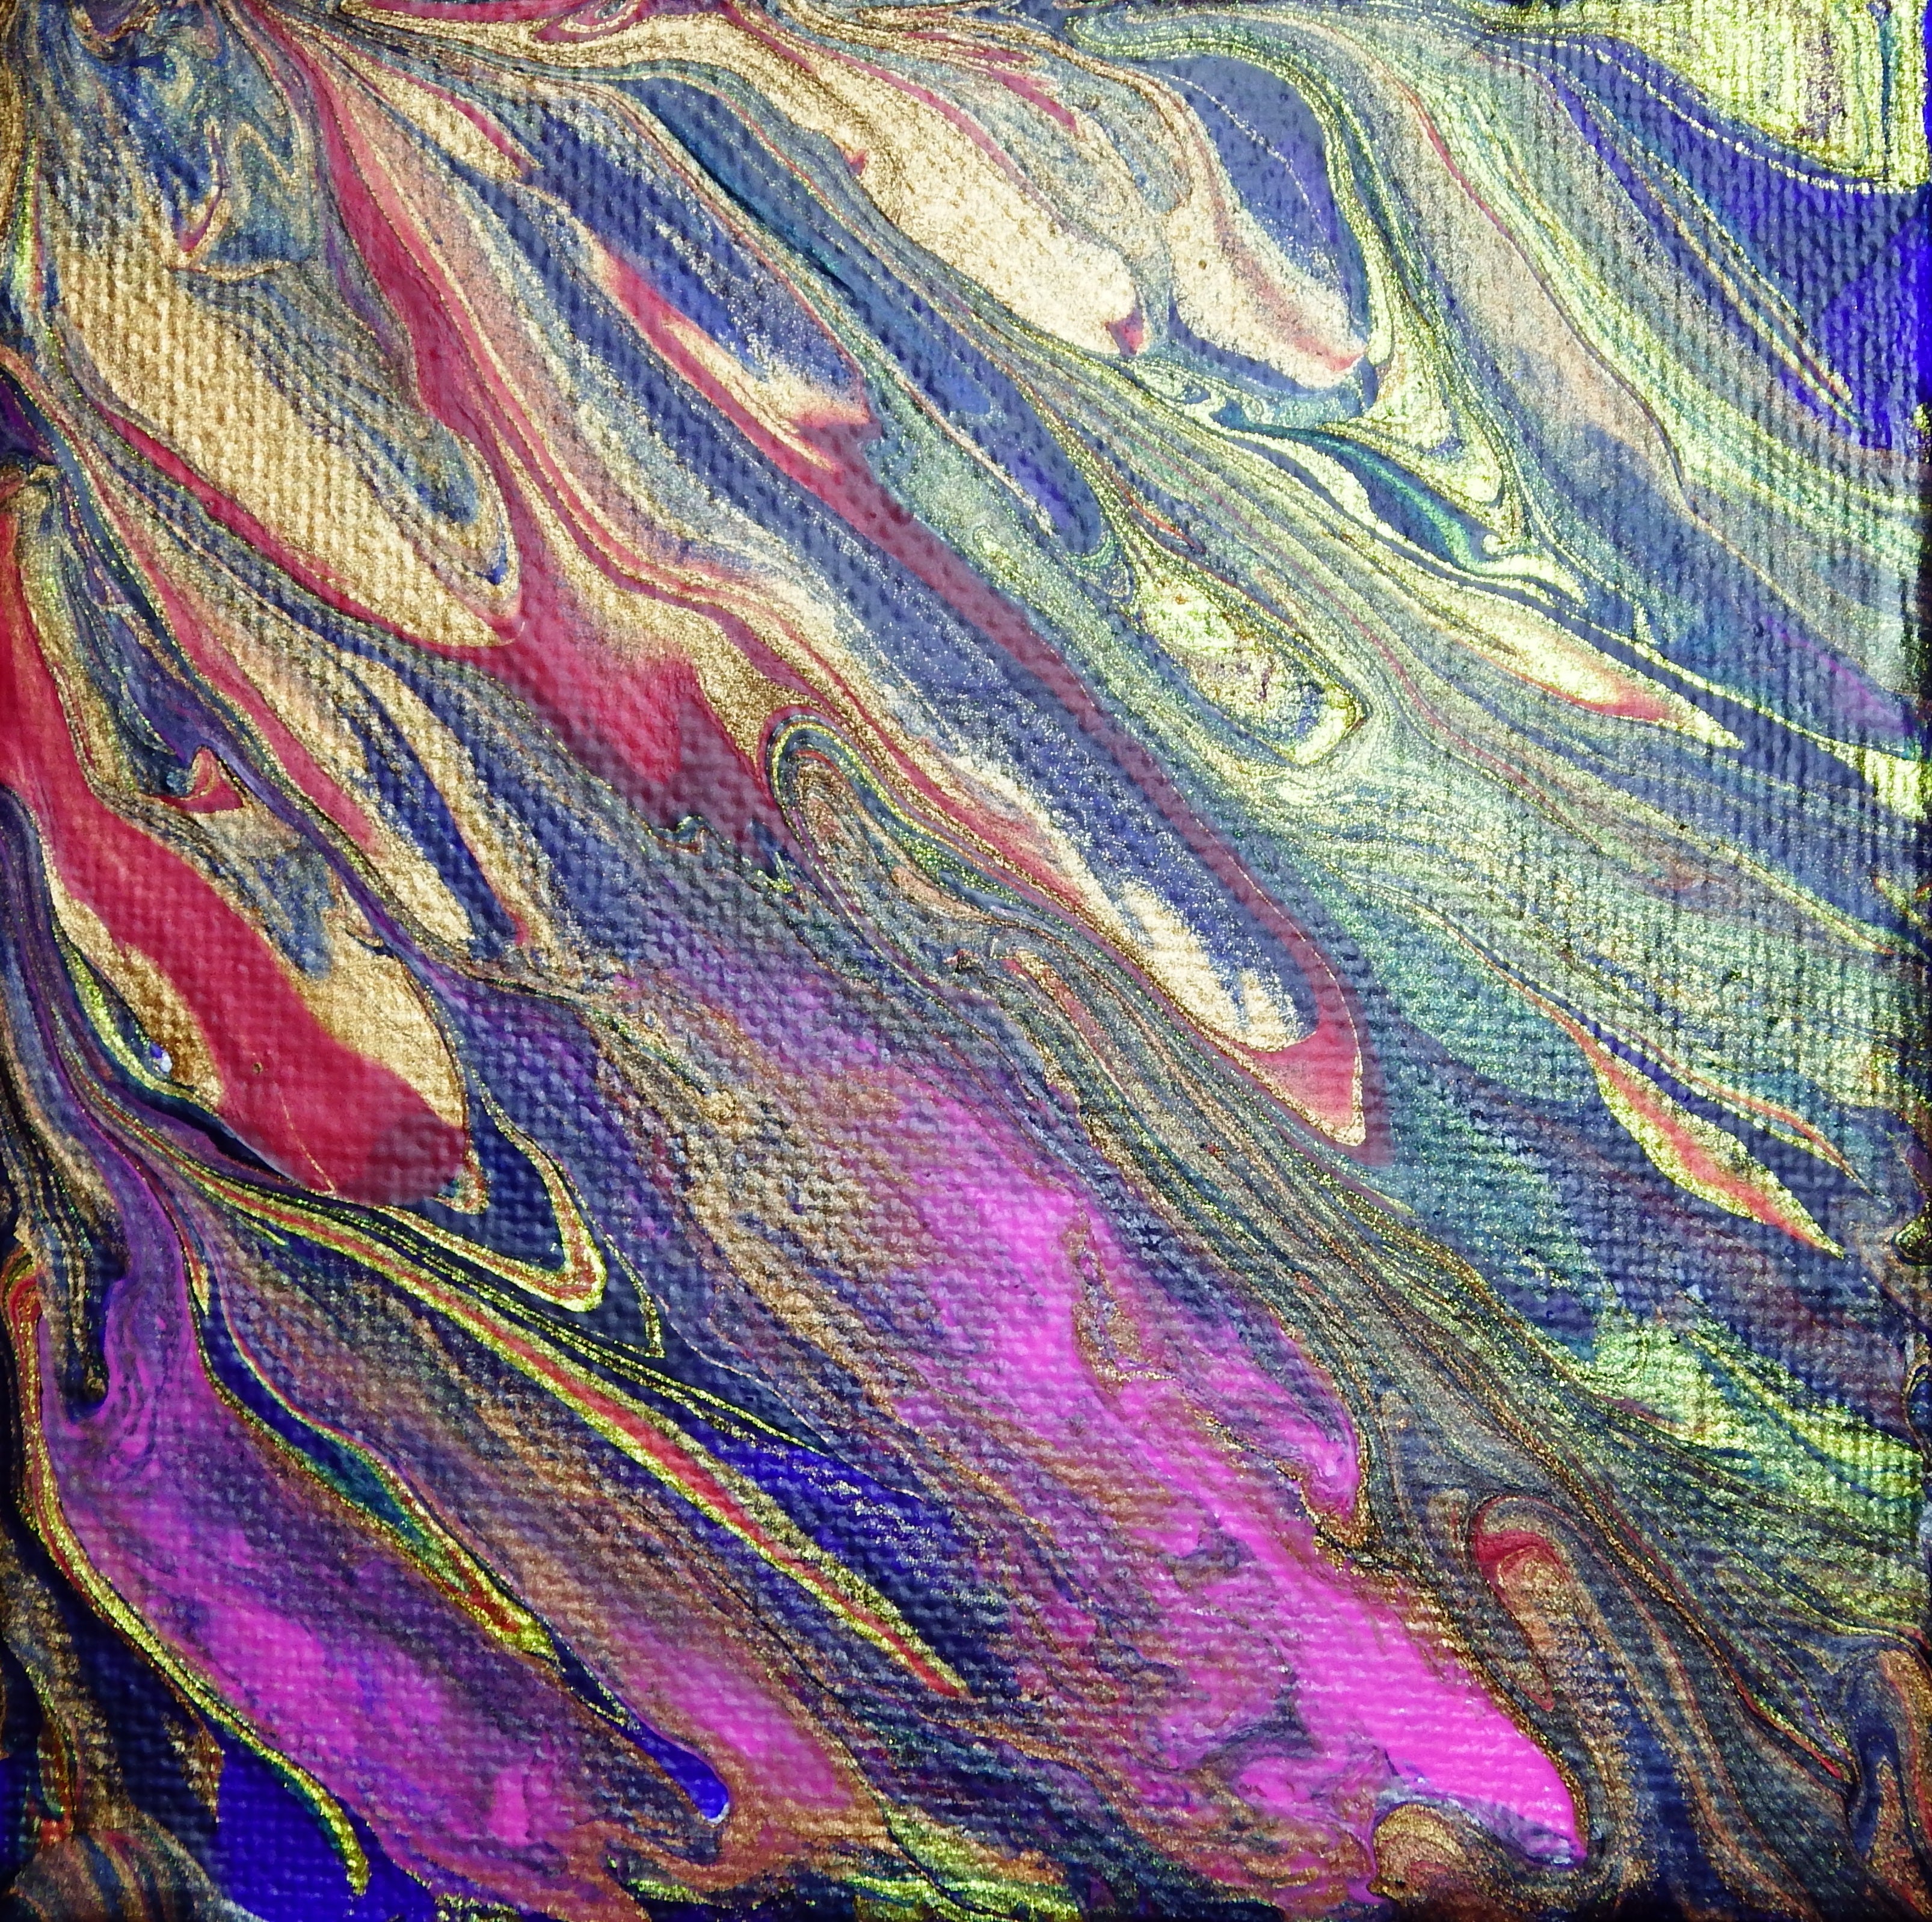 acrylic painting,acrylic pouring, artsy sister